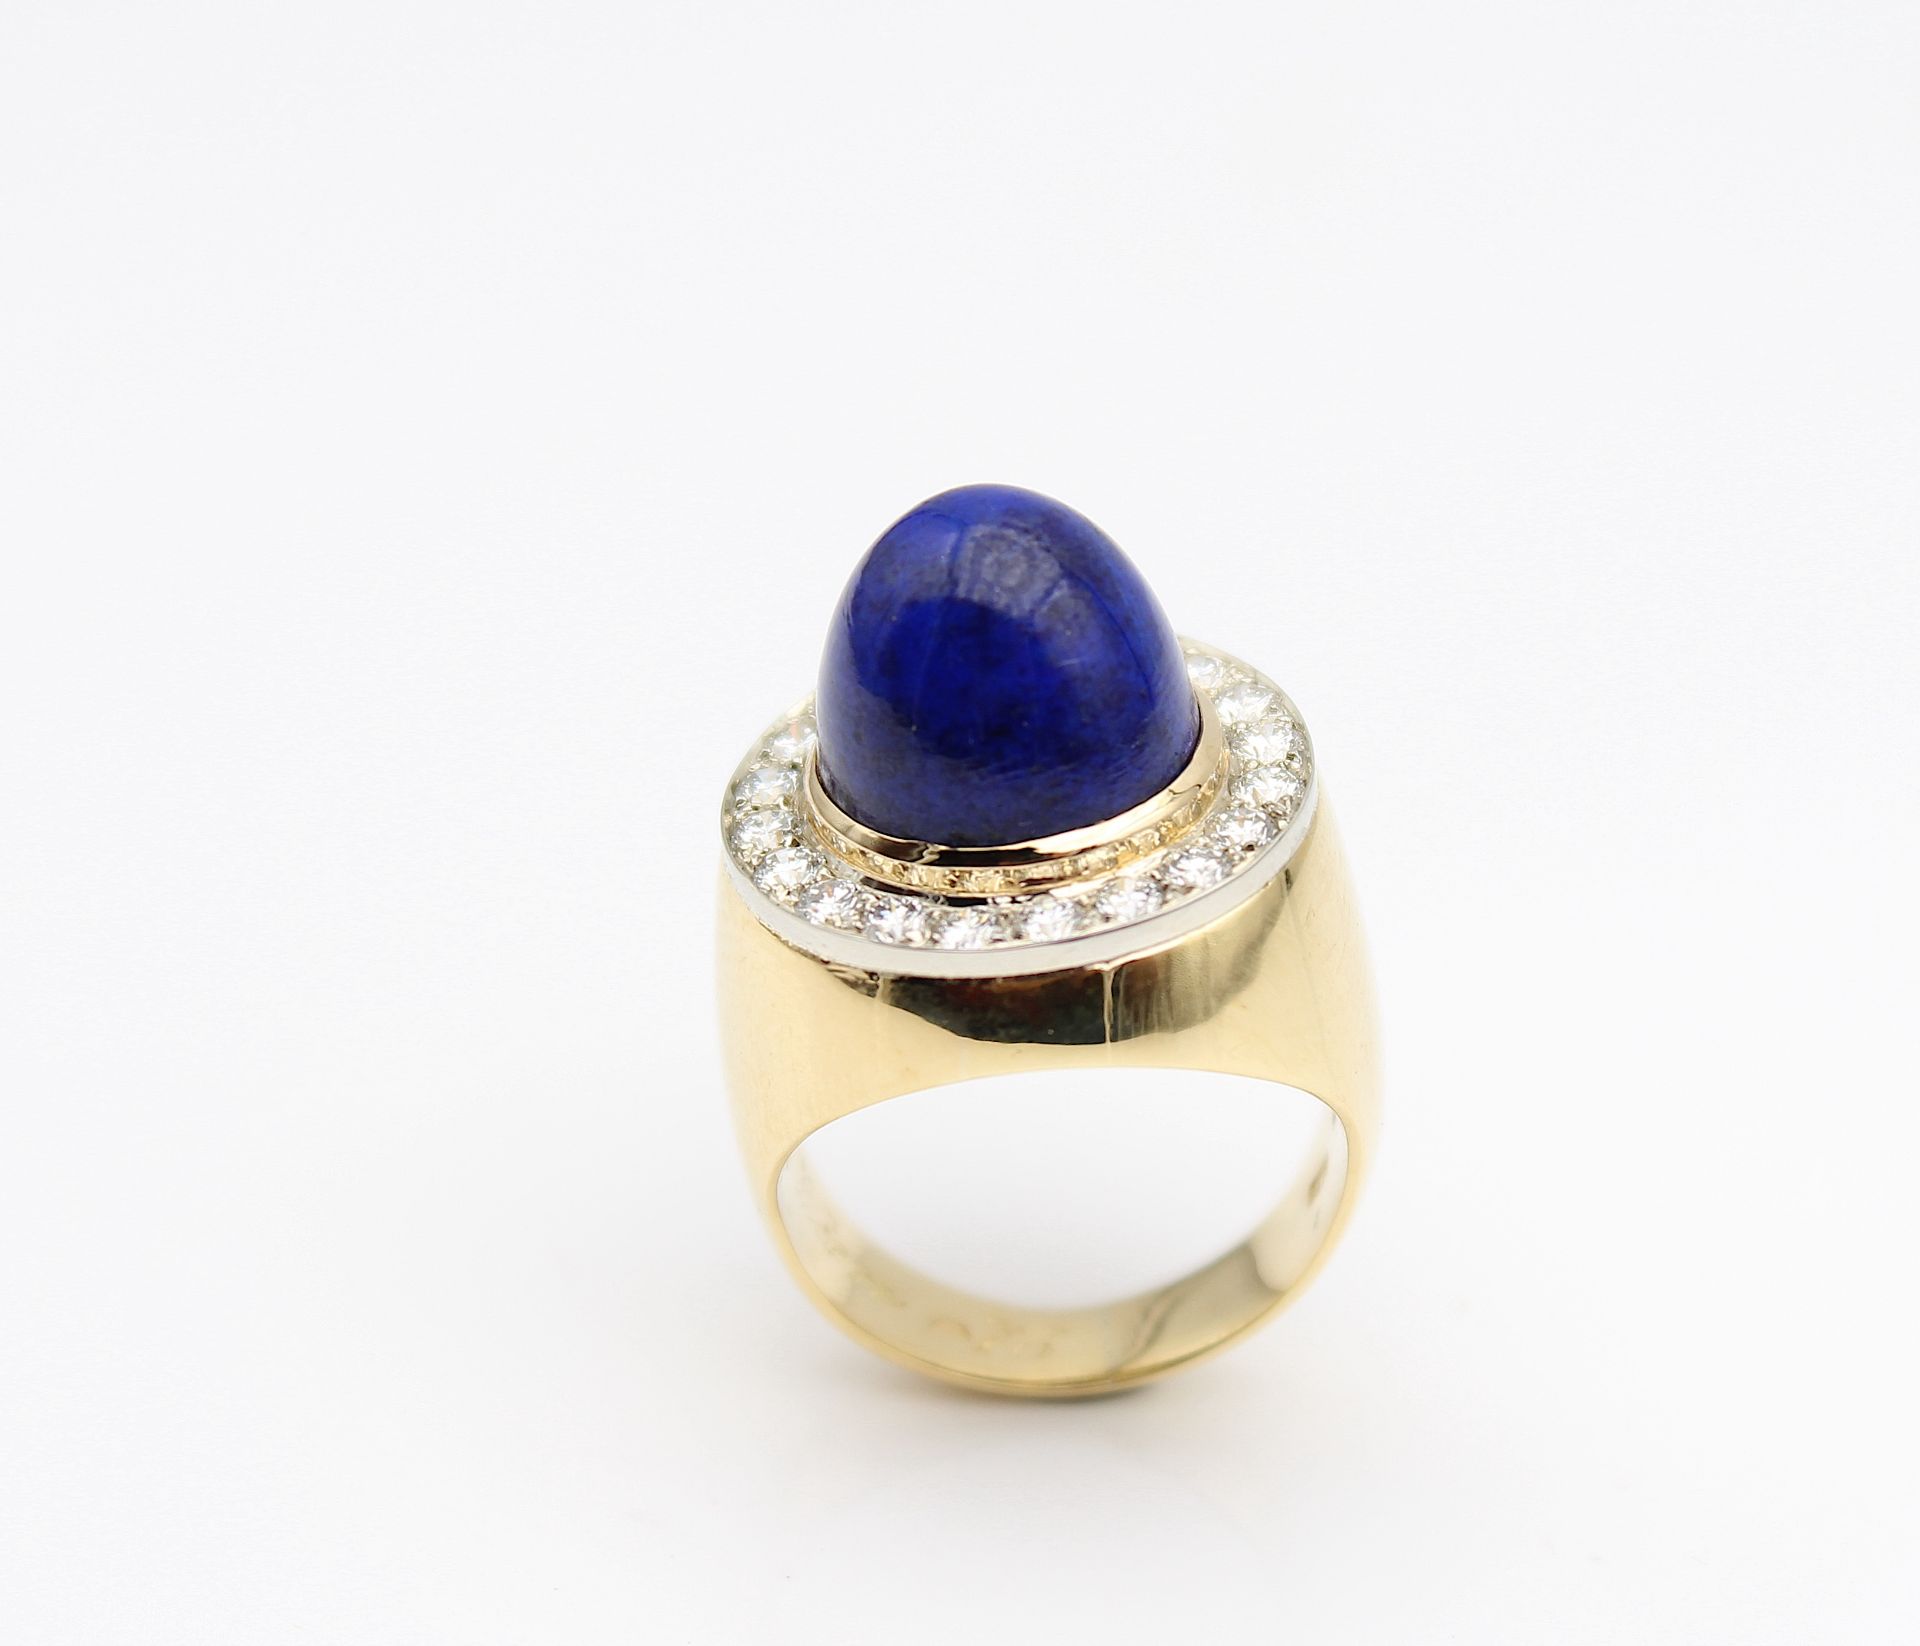 Exclusive ring from Vienna with lapis lazuli and brilliants - Image 3 of 5